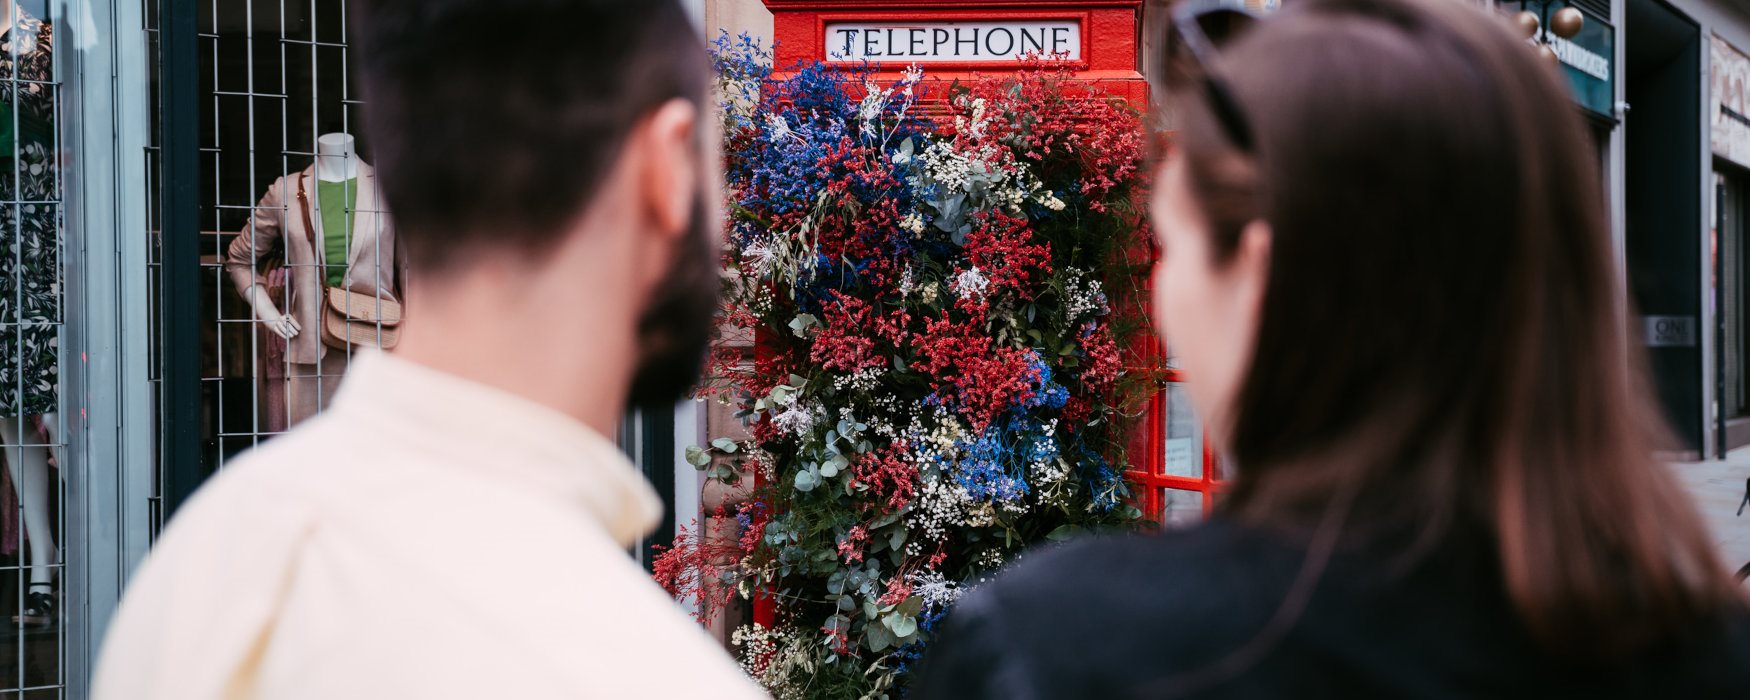 2 people looking at a floral telephone box in Manchester